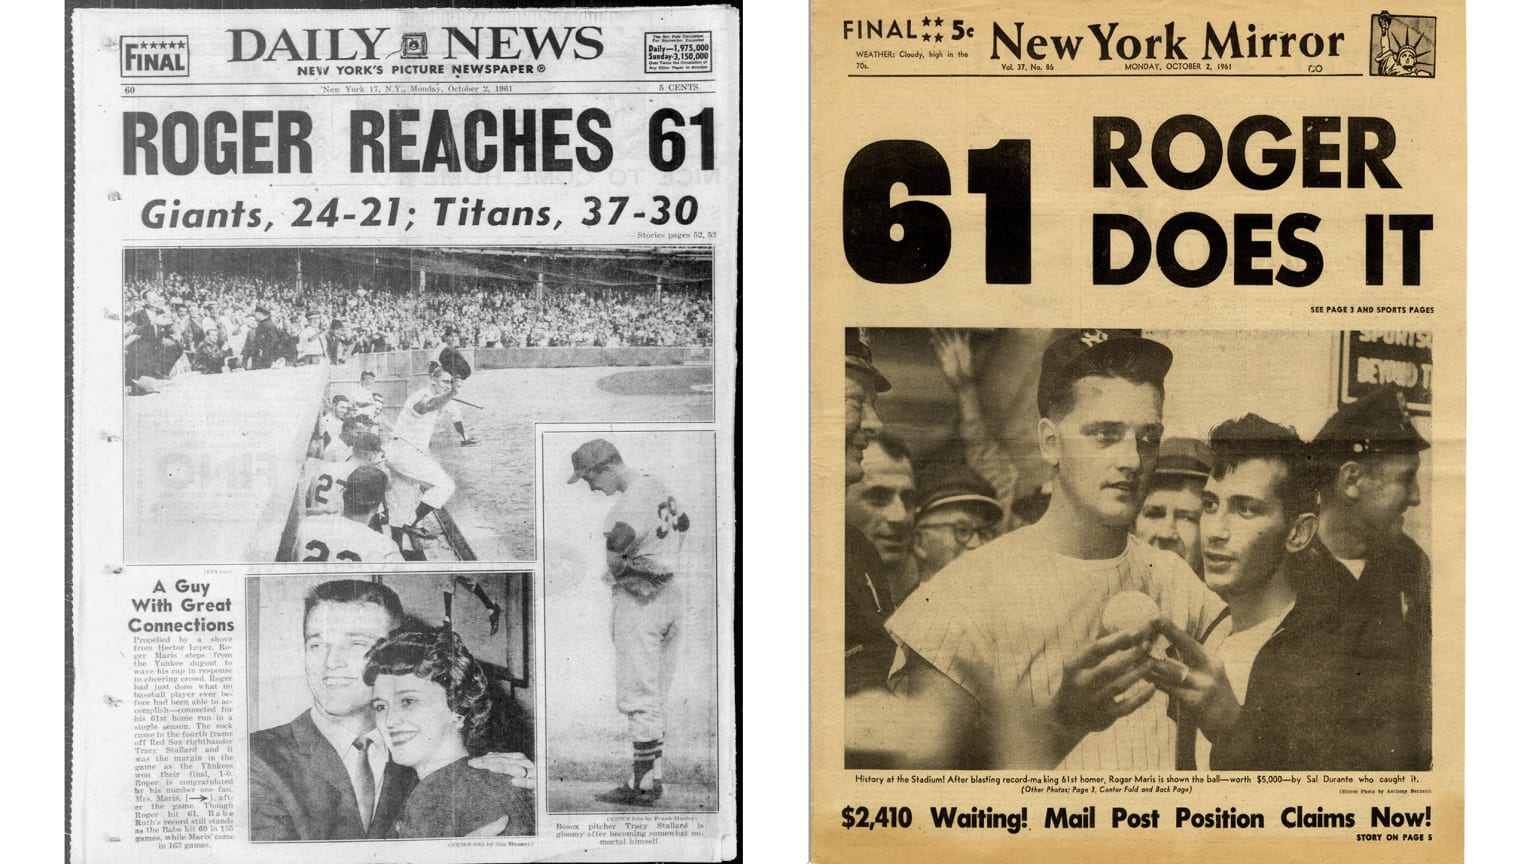 Images of the New York Daily News and New York Mirror front pages announcing Roger Maris' 61st home run